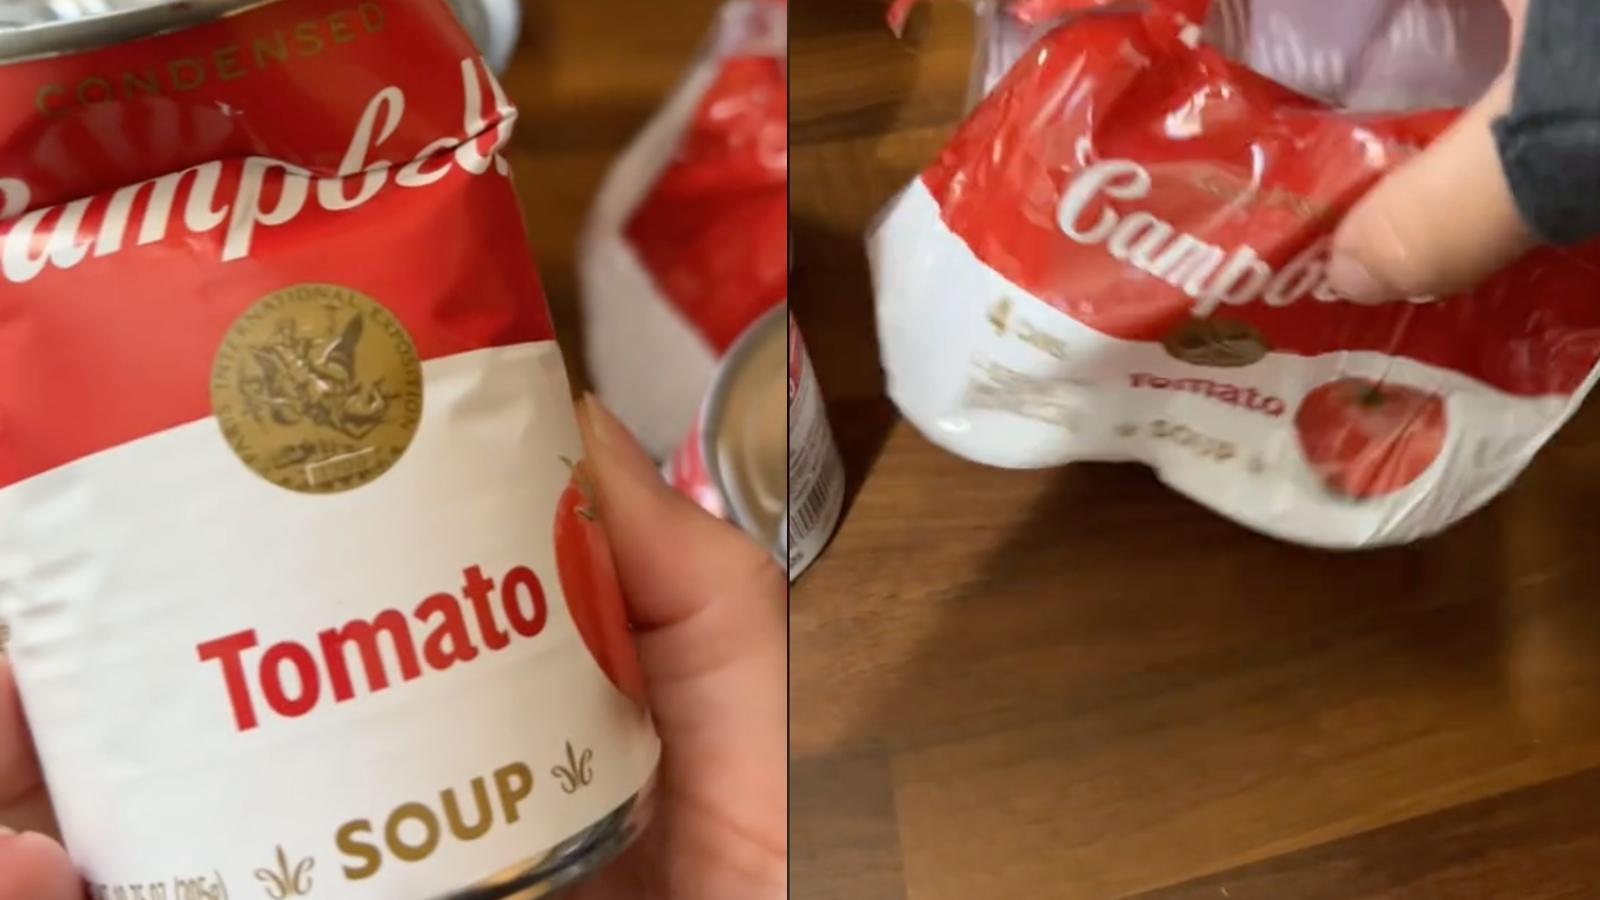 Dented Campbell's soup